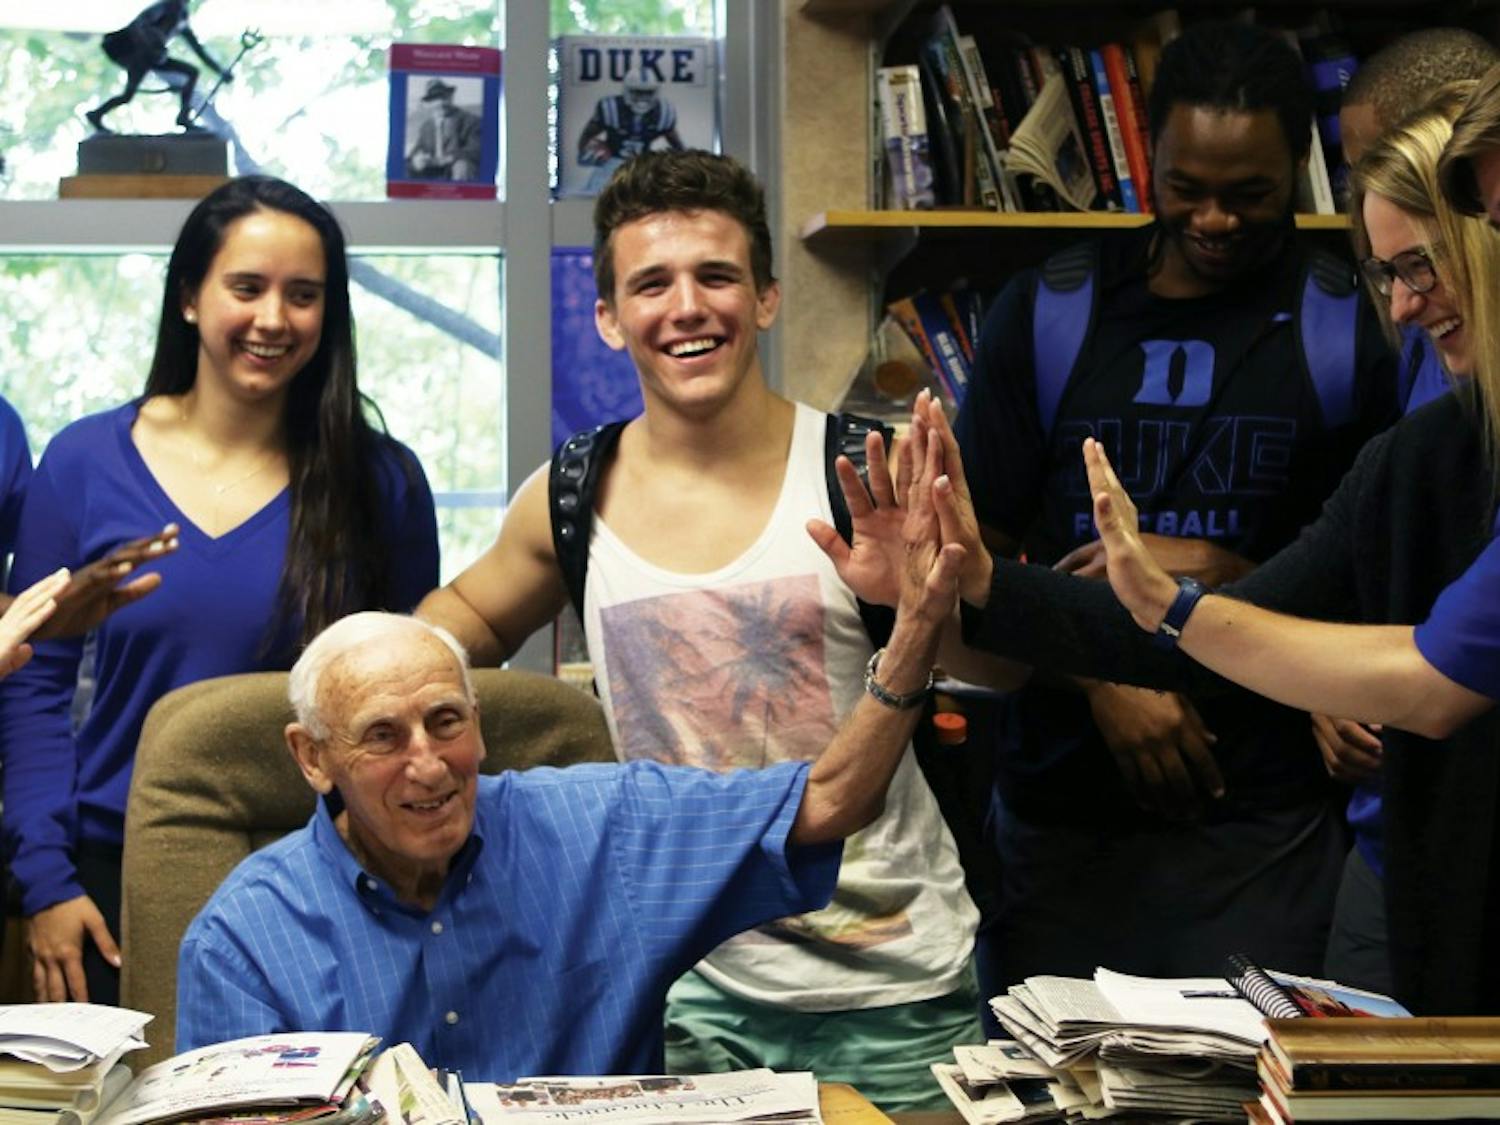 Al Buehler taught one of his last classes in his office in Cameron Indoor Stadium Monday afternoon. Buehler has been at Duke for 60 years.